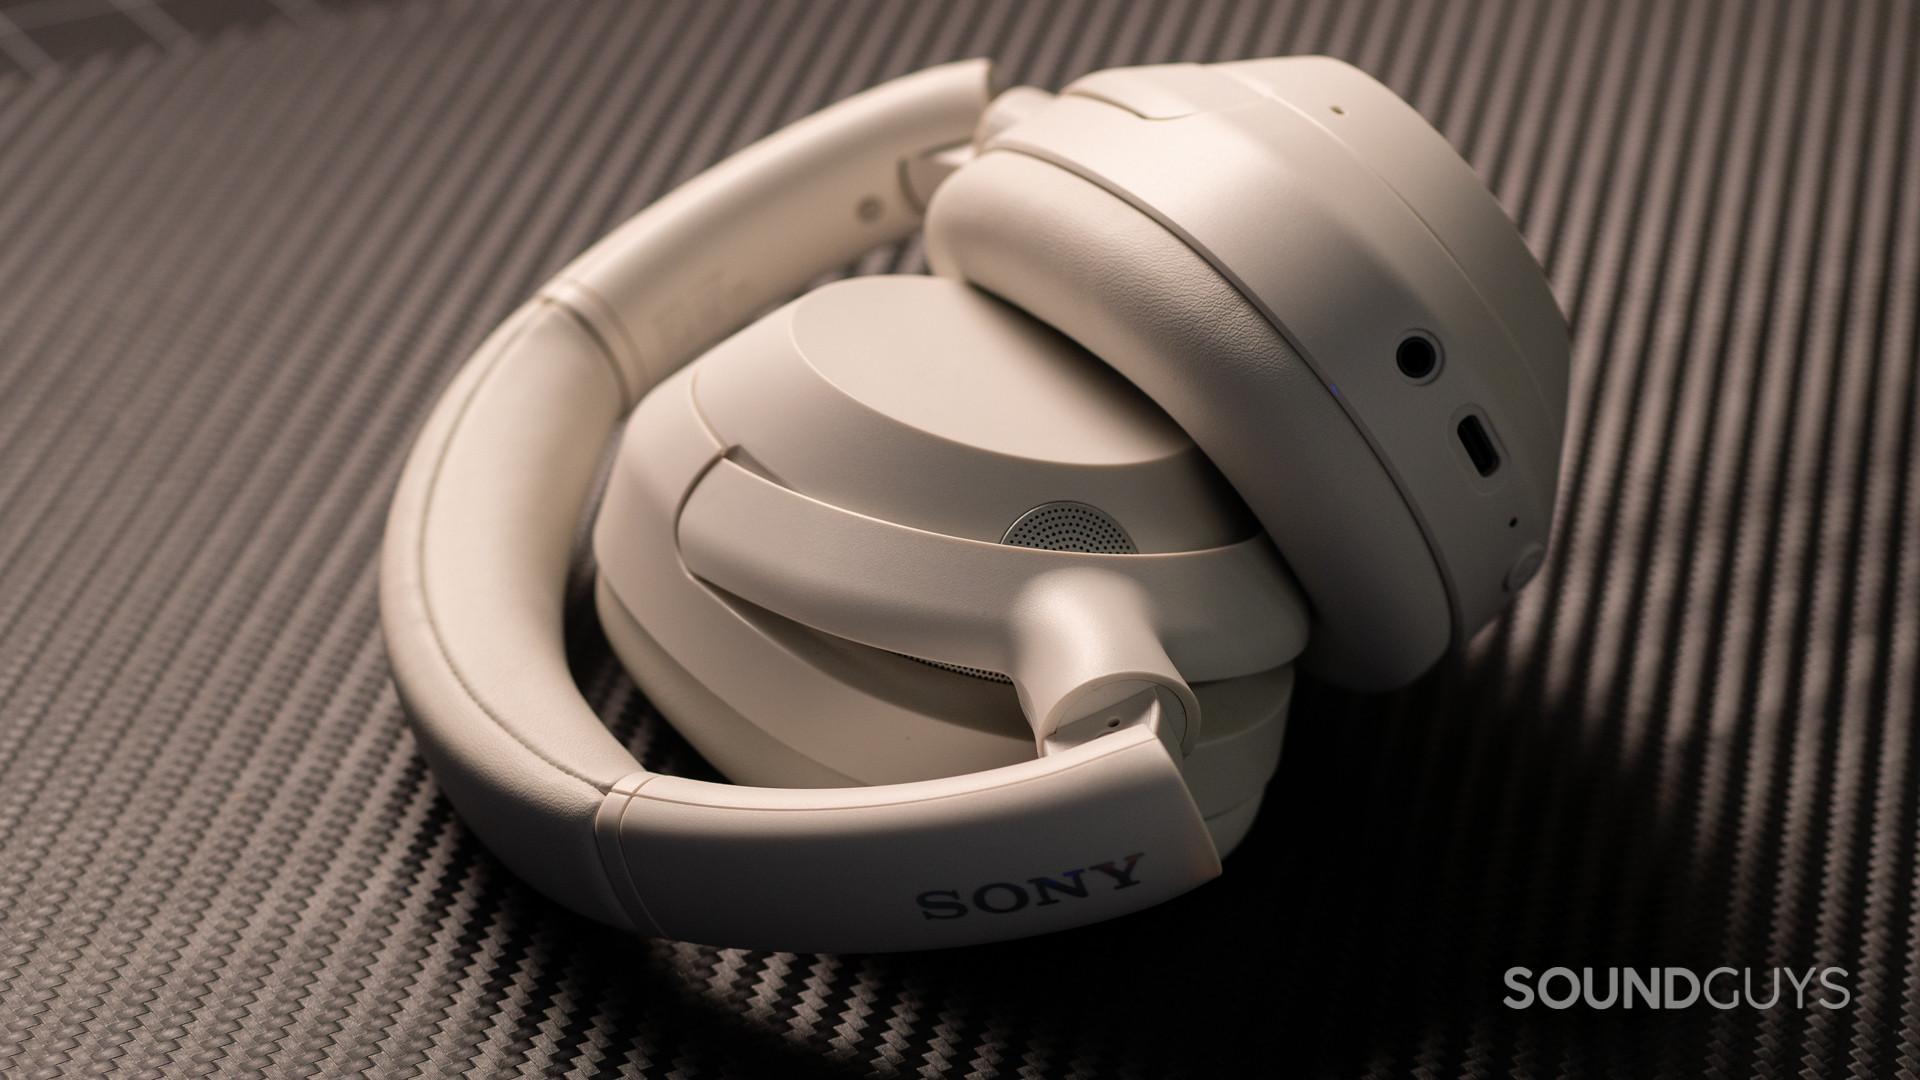 A photo of the Sony ULT WEAR headphones, foleded up atop a desk.